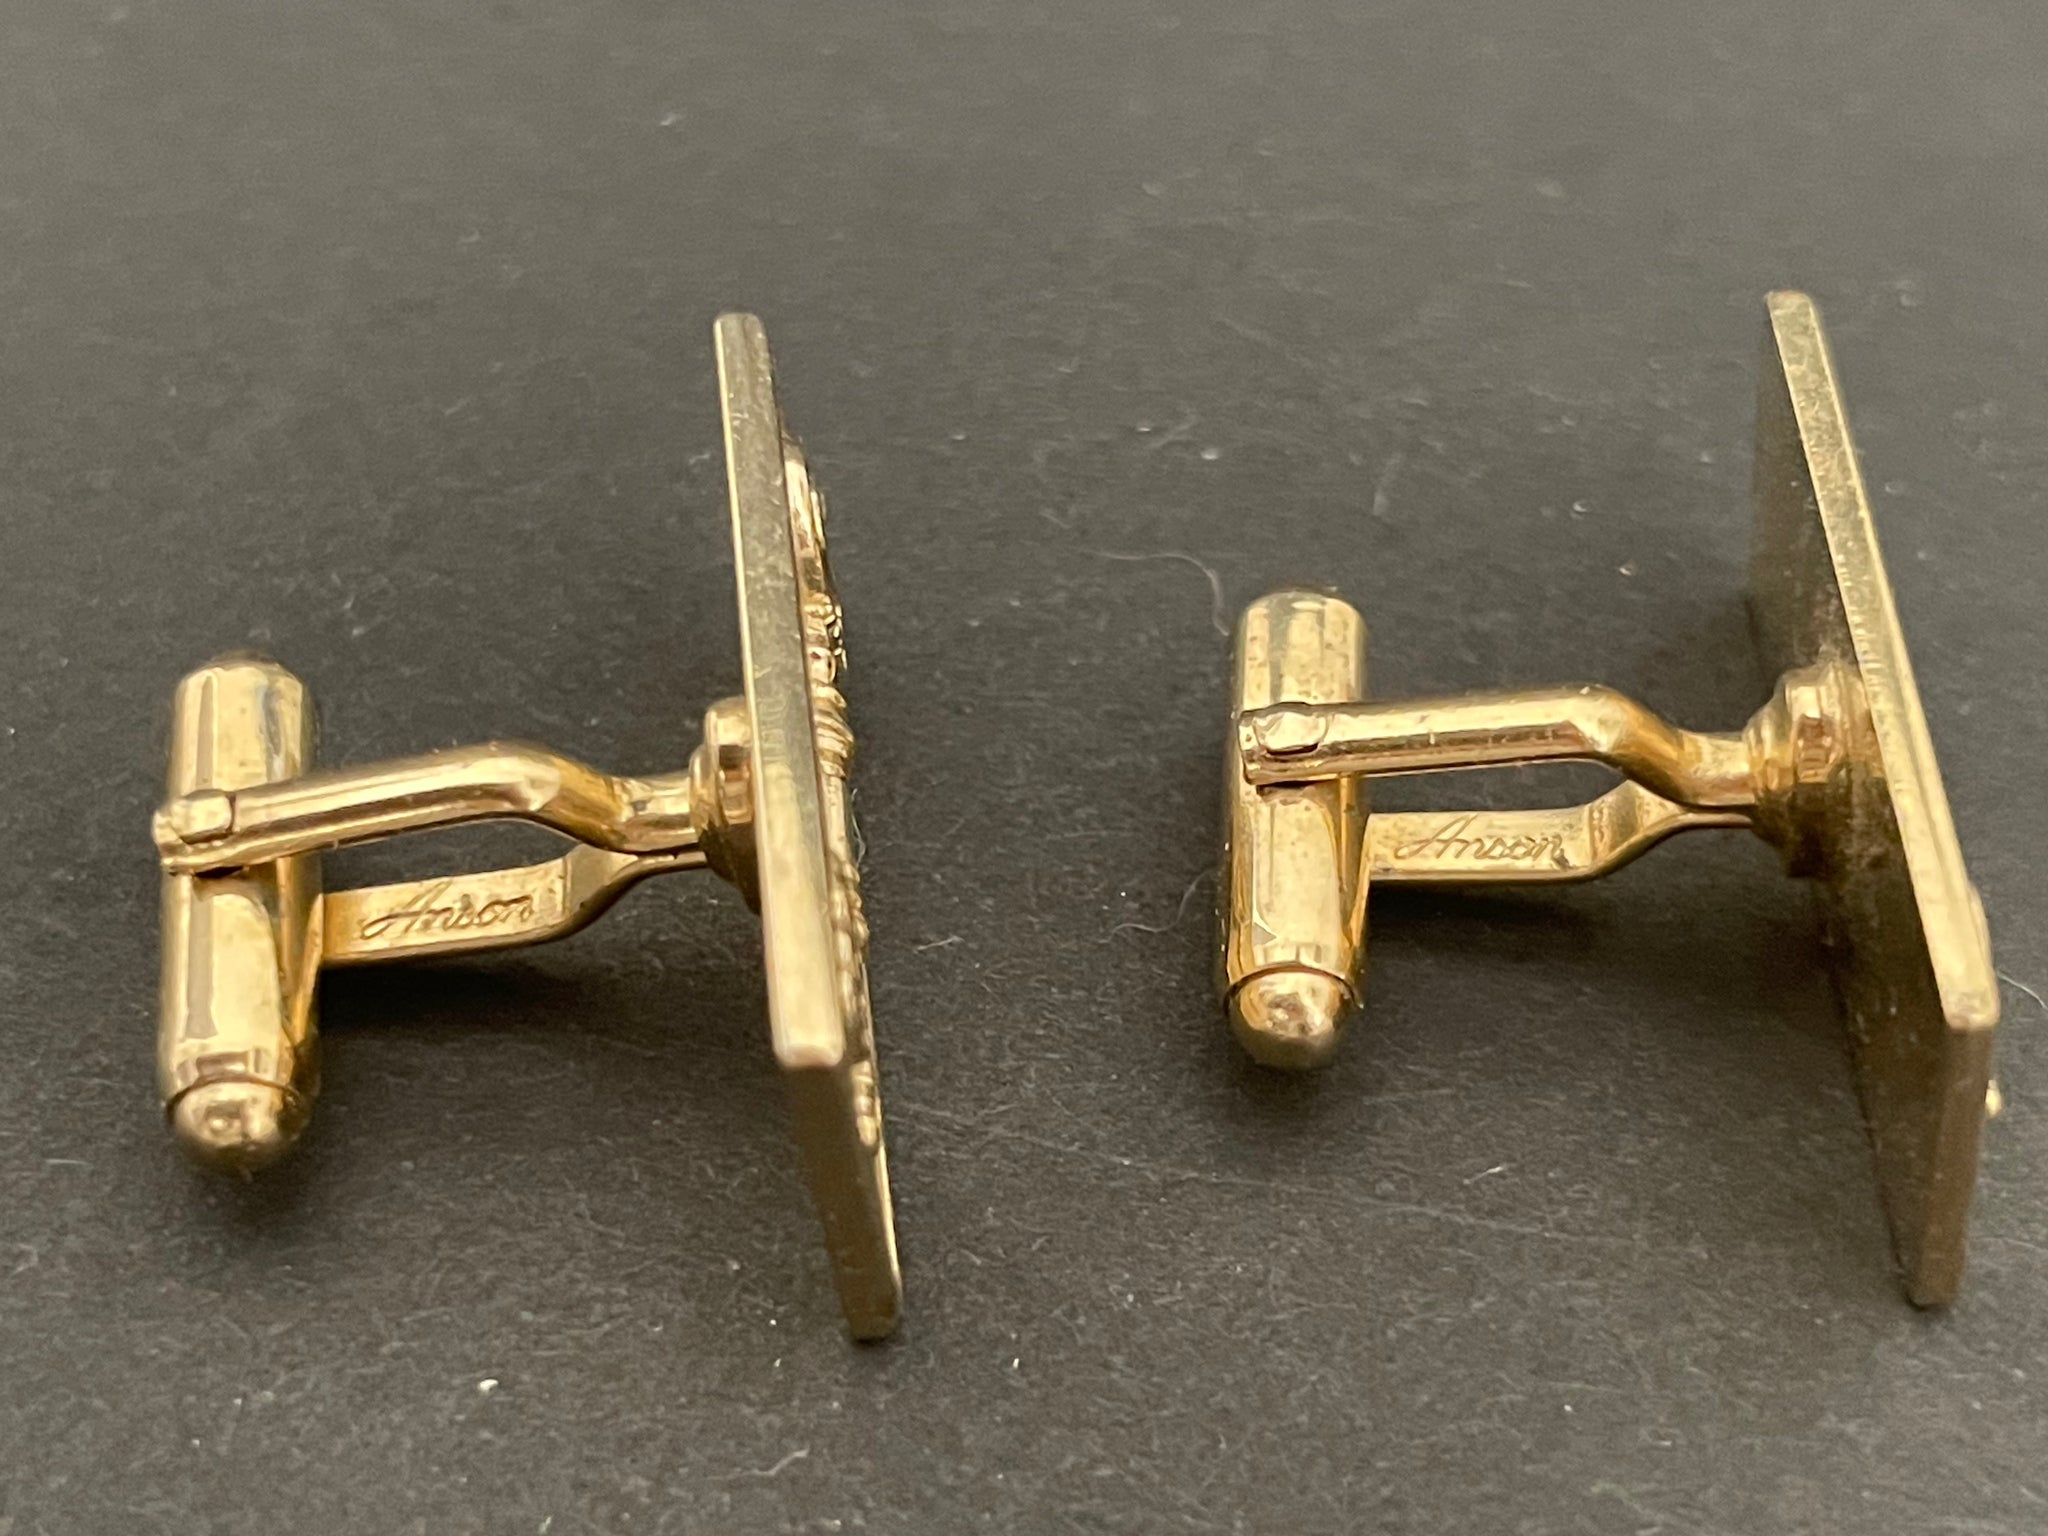 Cufflinks Depot - Largest Selection of Cuff Links for Men